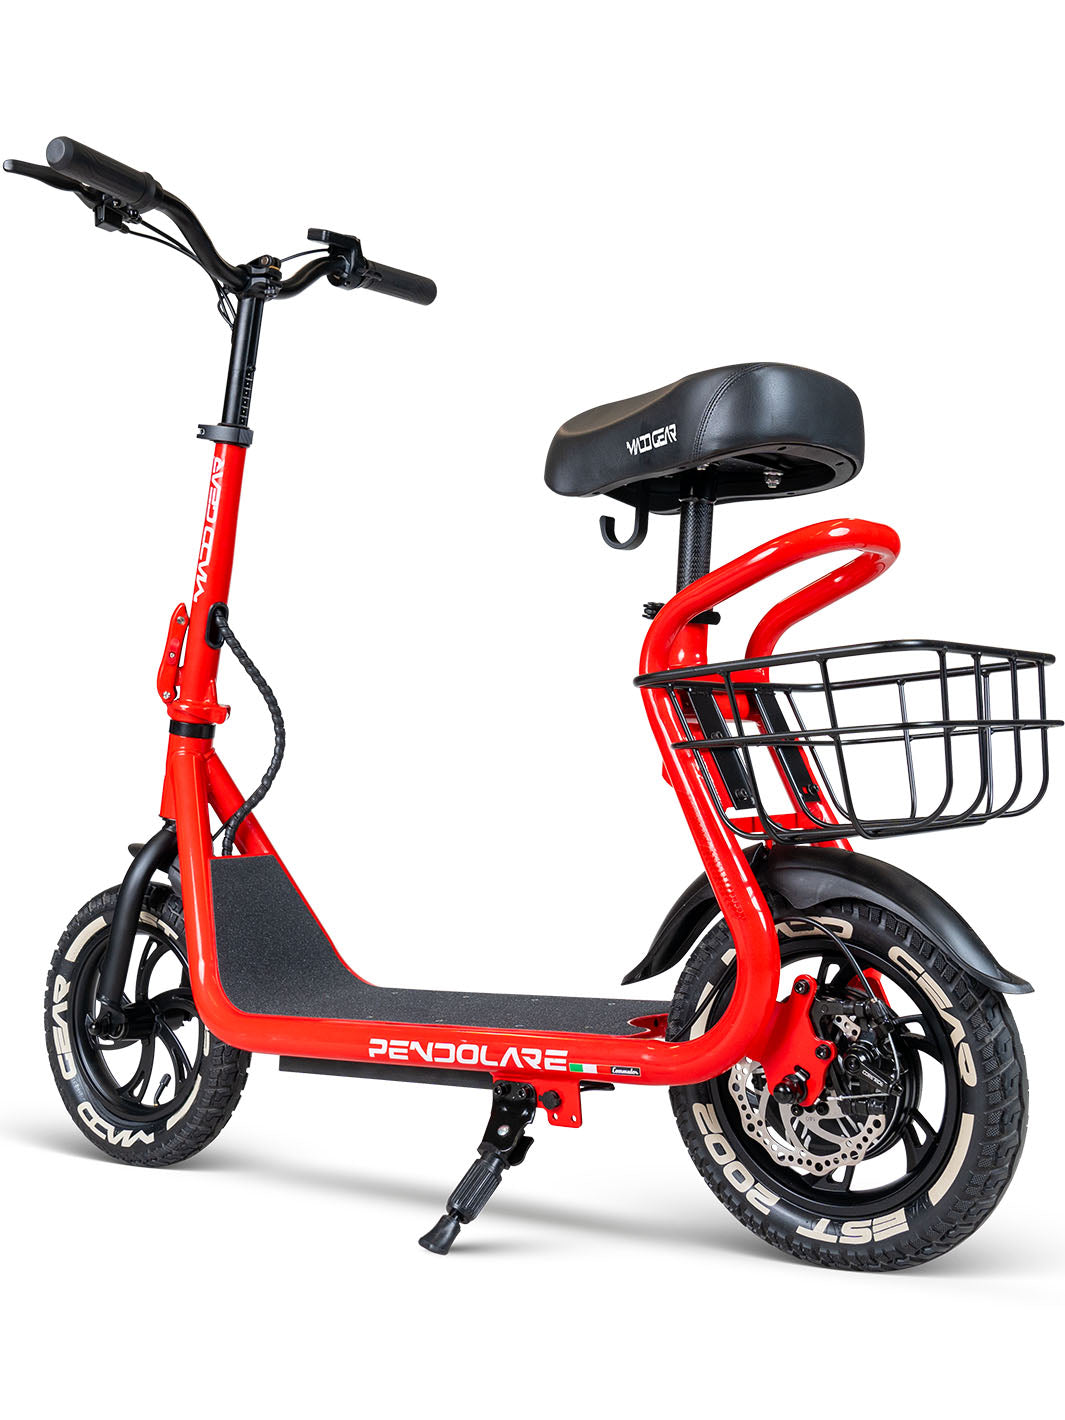 Madd Gear Commute Electric Pendolare 300 Scooter Jetson Teens Adults Red